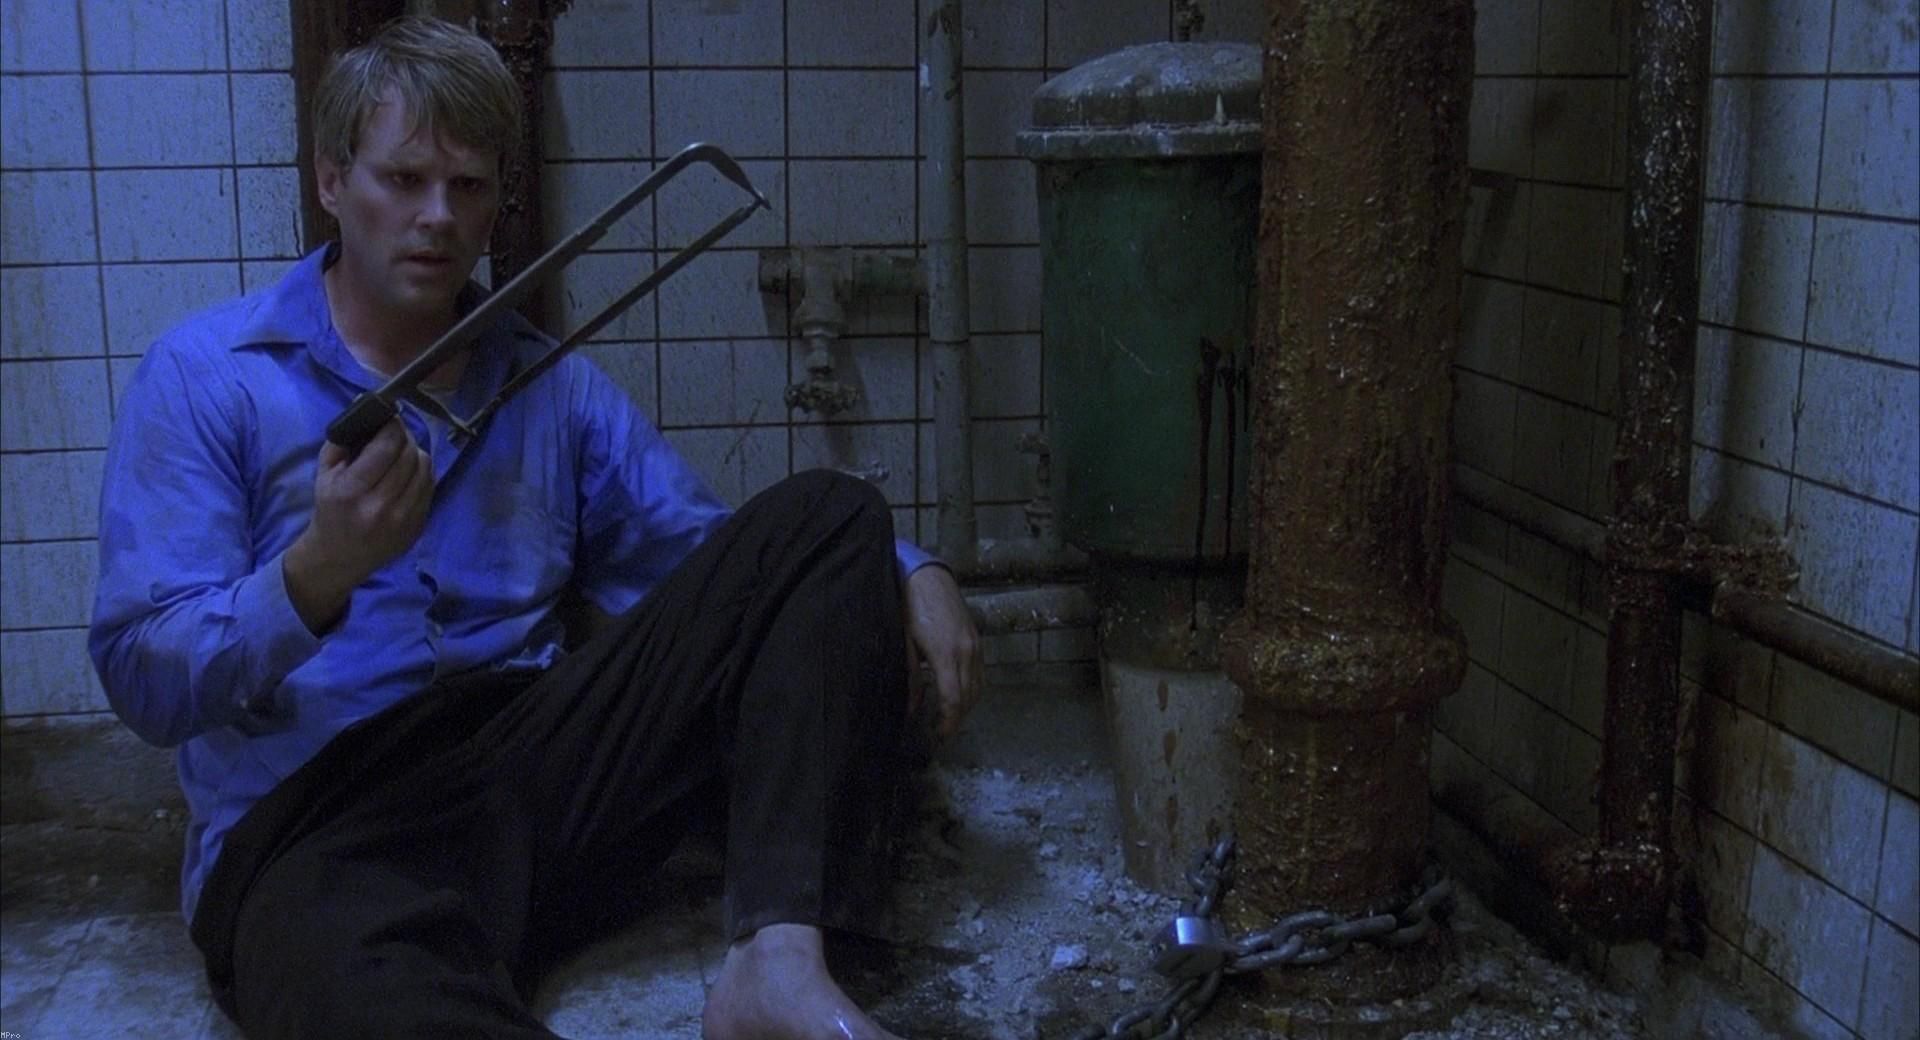 A man chained to a pipe in the original Saw movie.